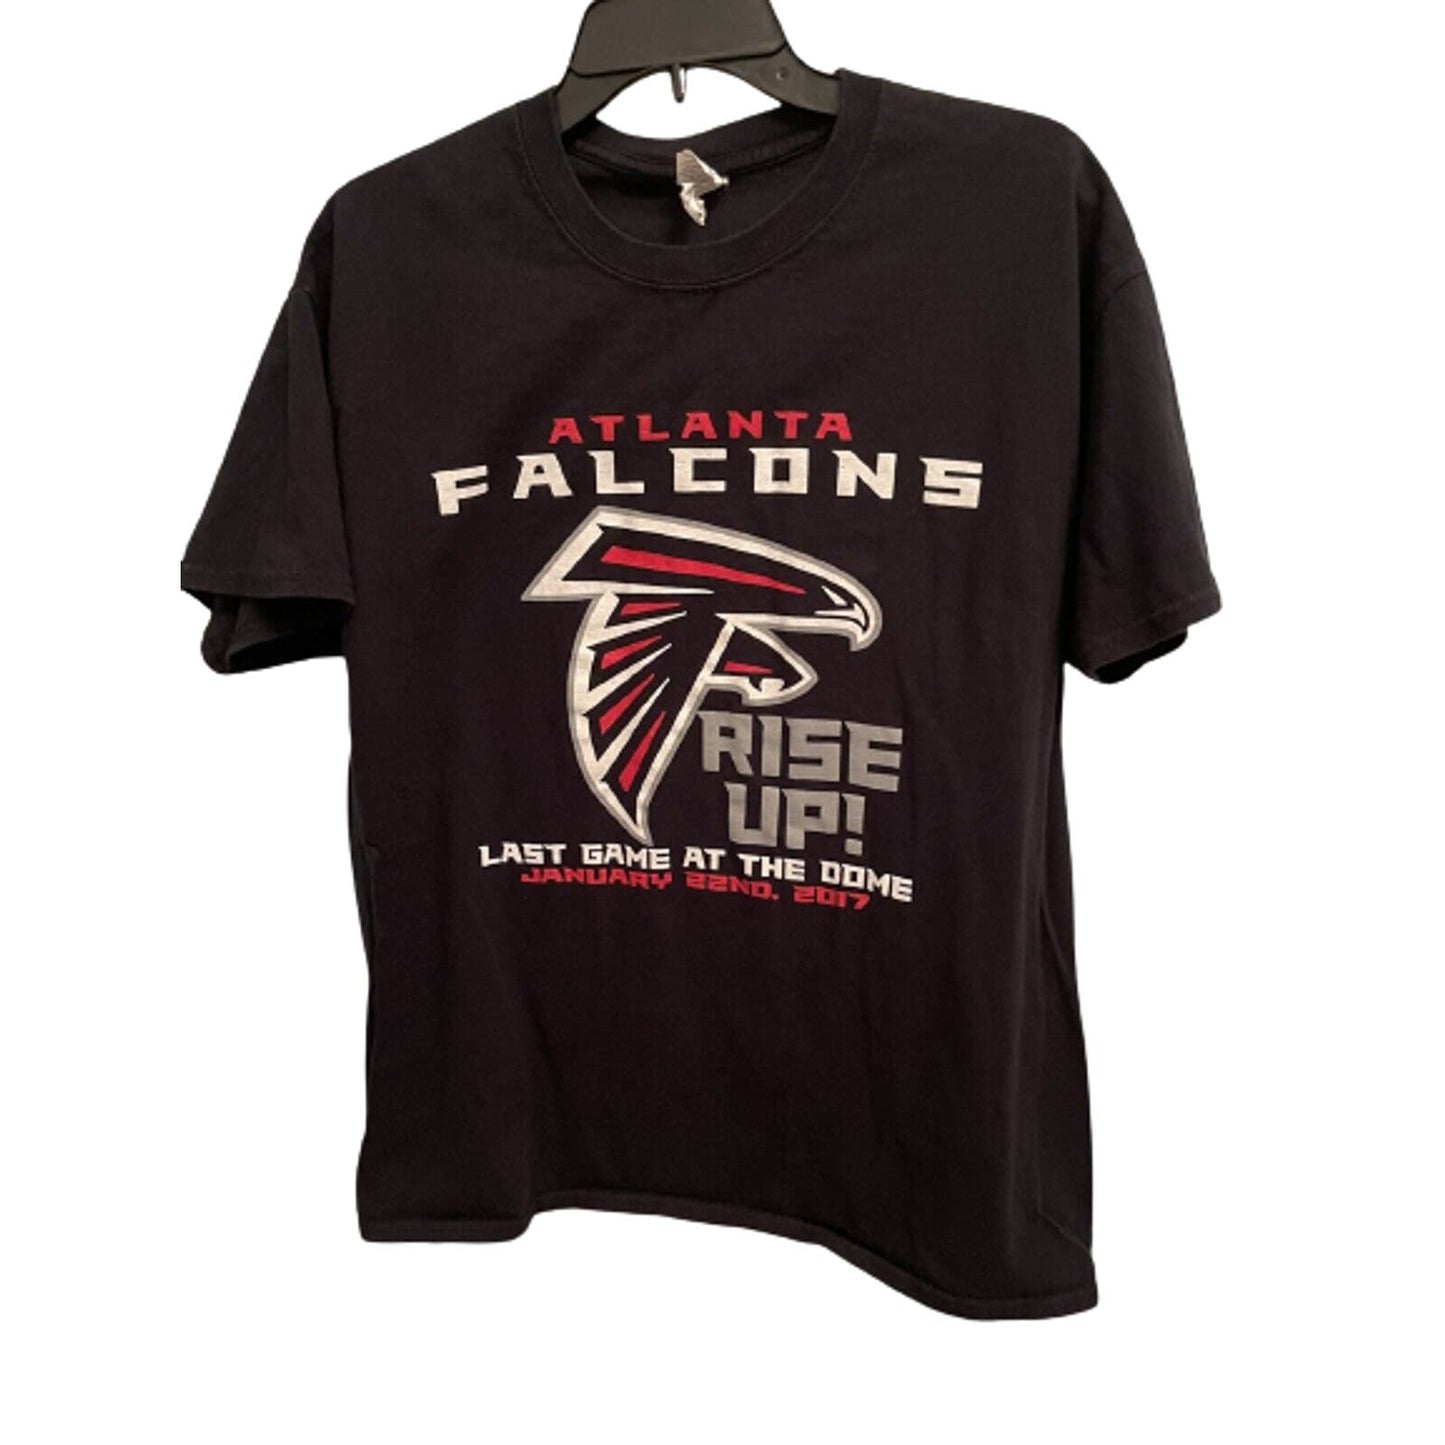 2017 Atlanta Falcons Men's Large 'Last Game in The Dome' Exclusive Game Day Tee